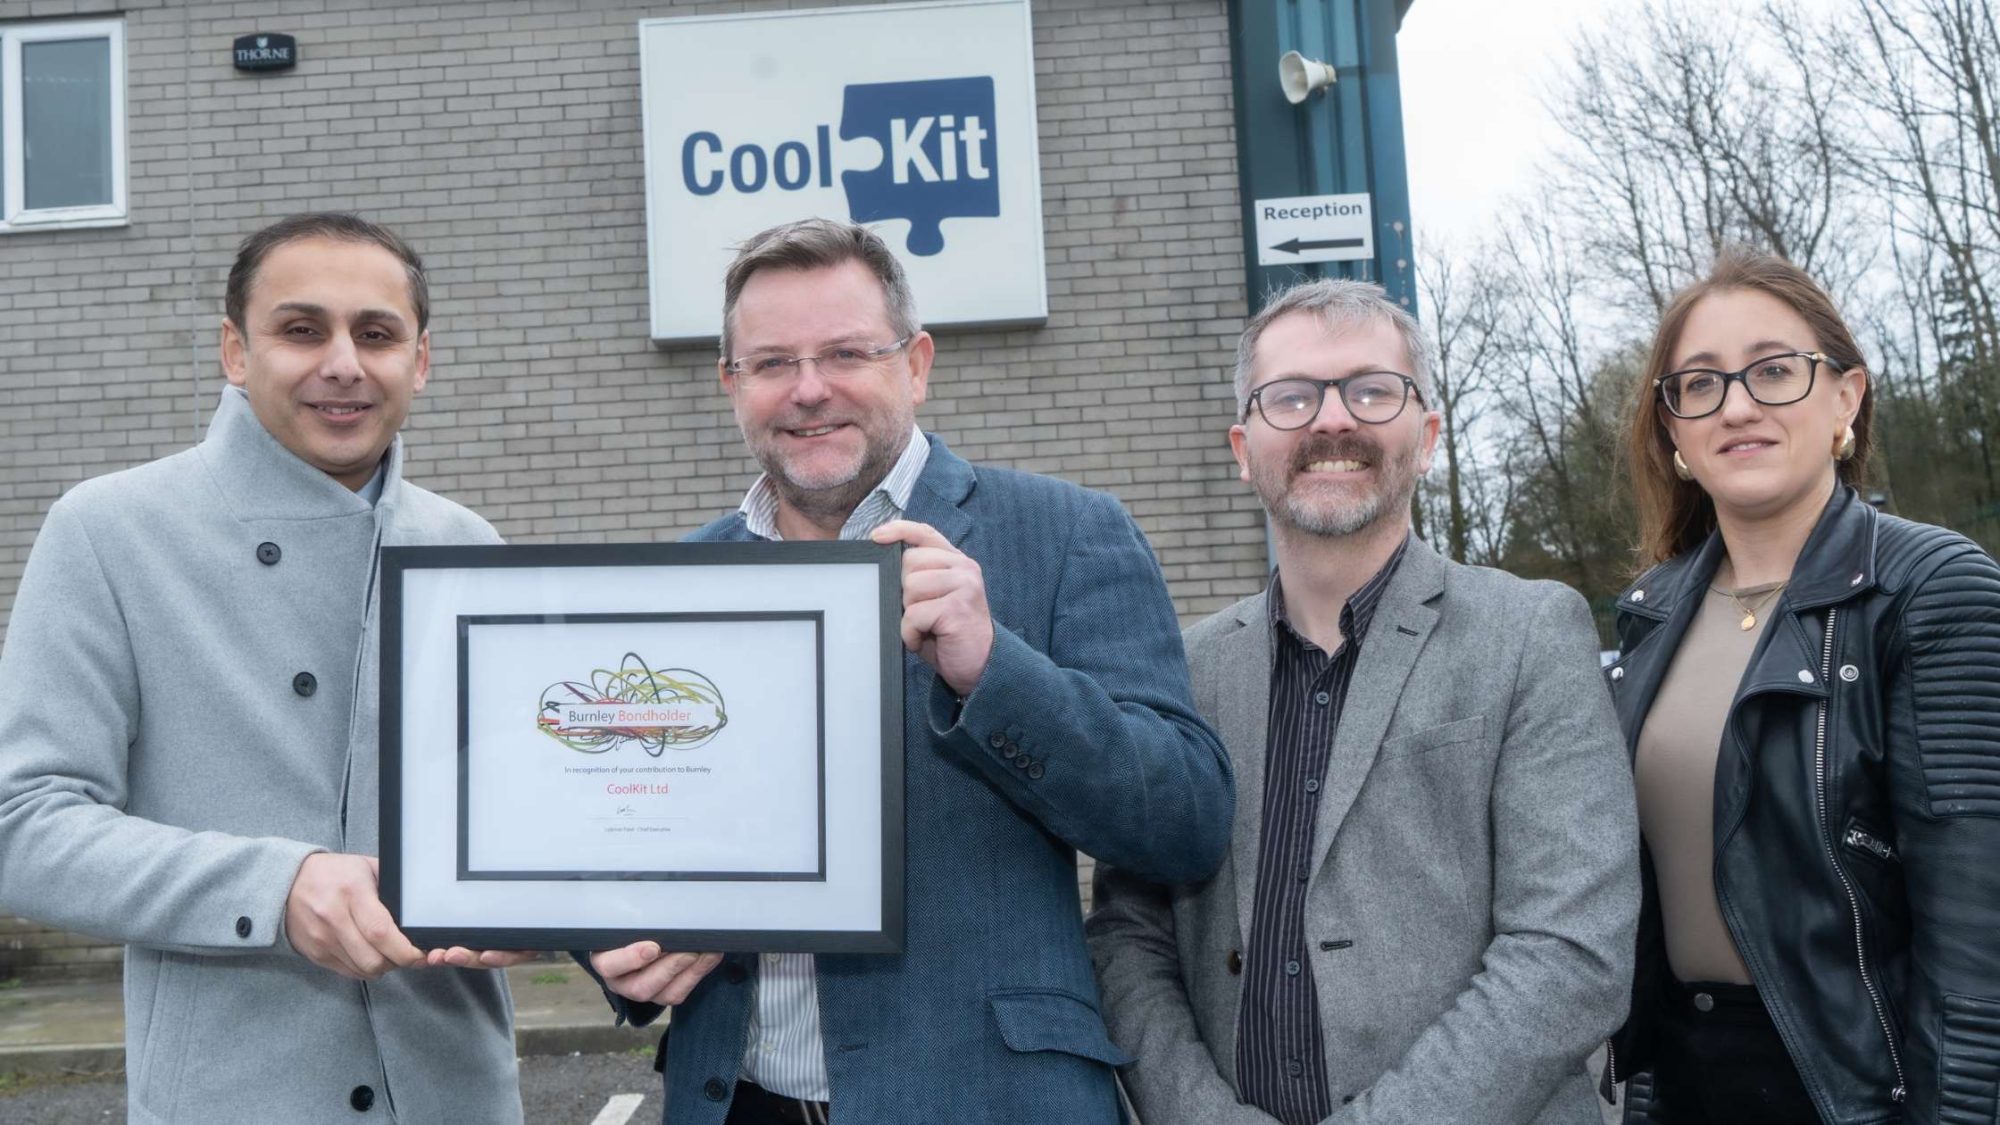 CoolKit reaffirms its commitment to Burnley